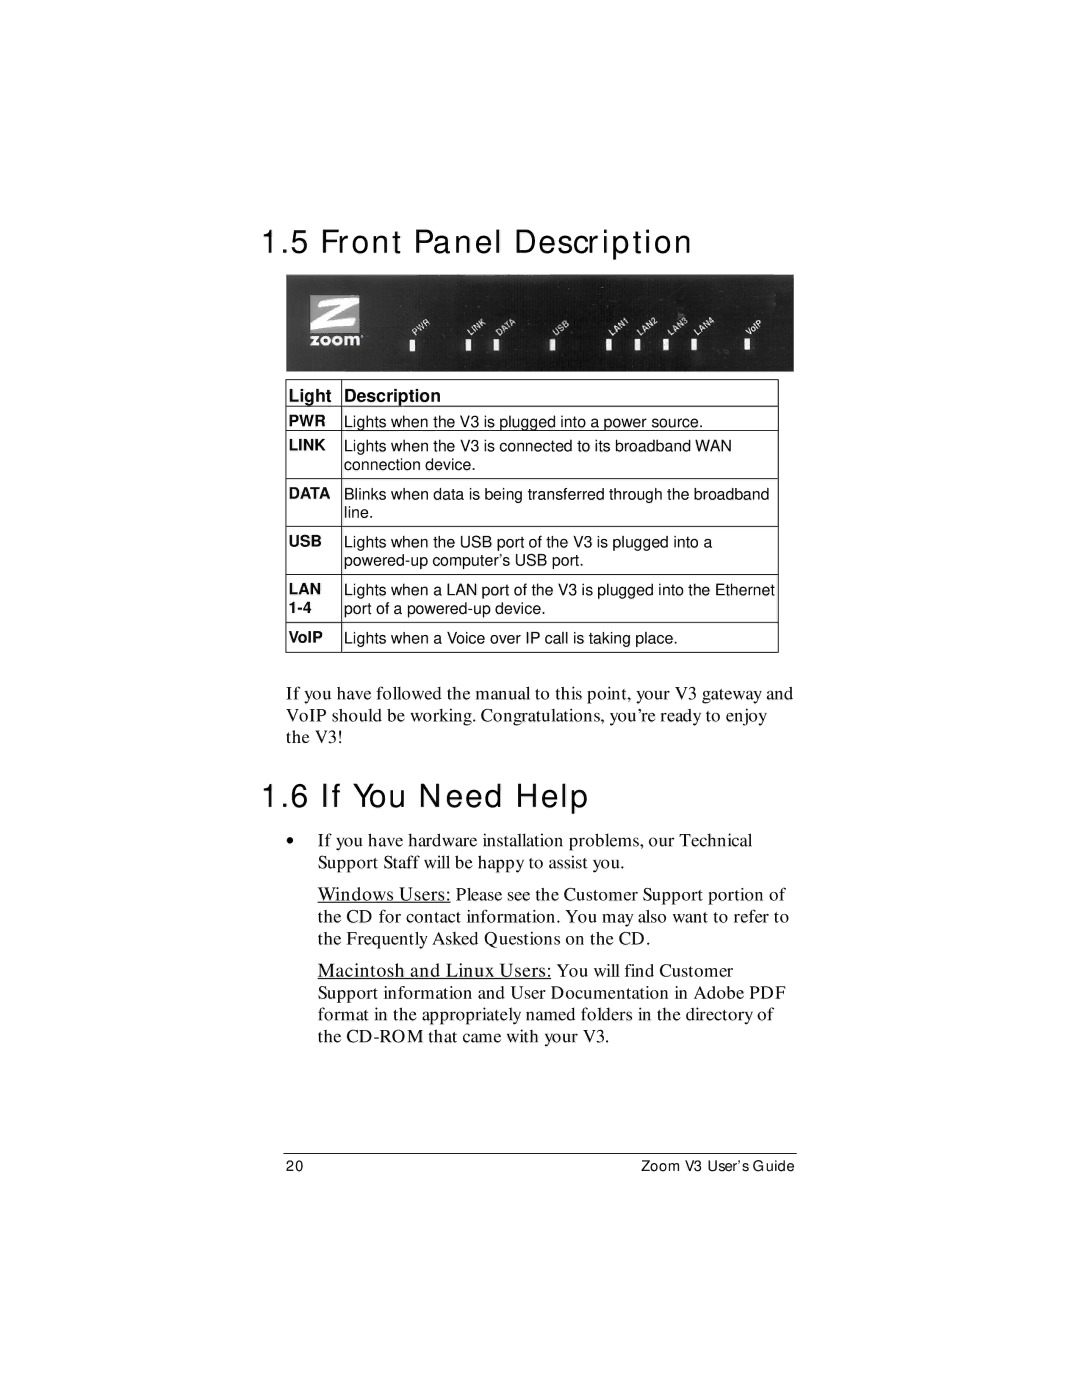 Zoom Zoom V3 manual Front Panel Description, If You Need Help, VoIP 